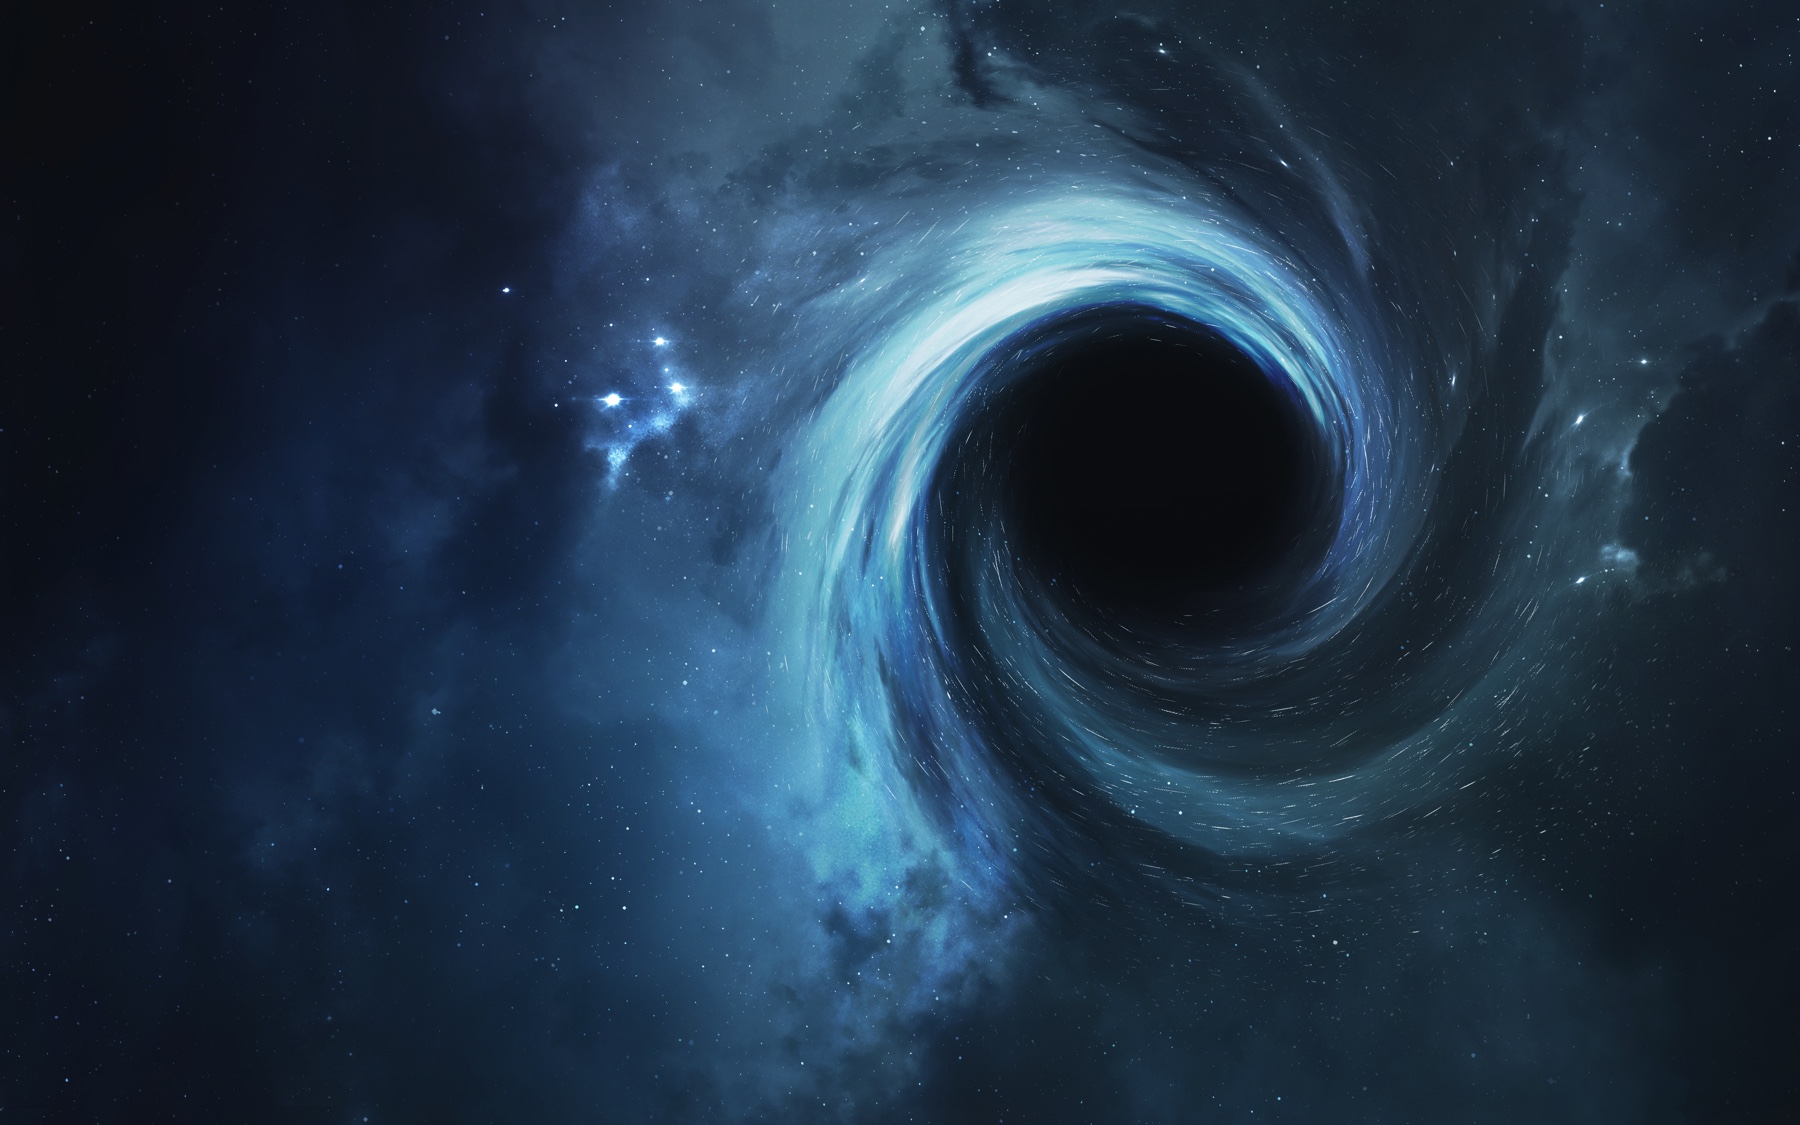 Black Holes As We Know Them May Not Exist | Live Science